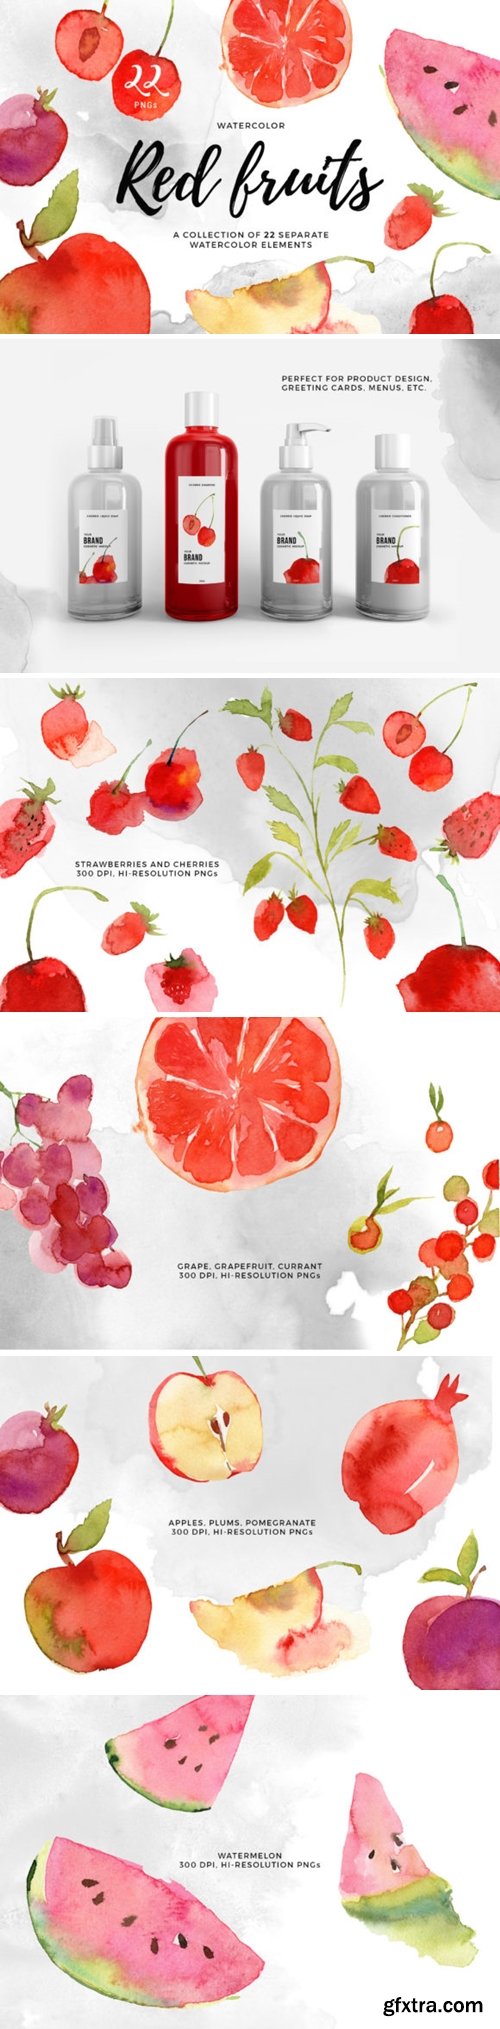 Hand Drawn Watercolor Red Fruits 3732193